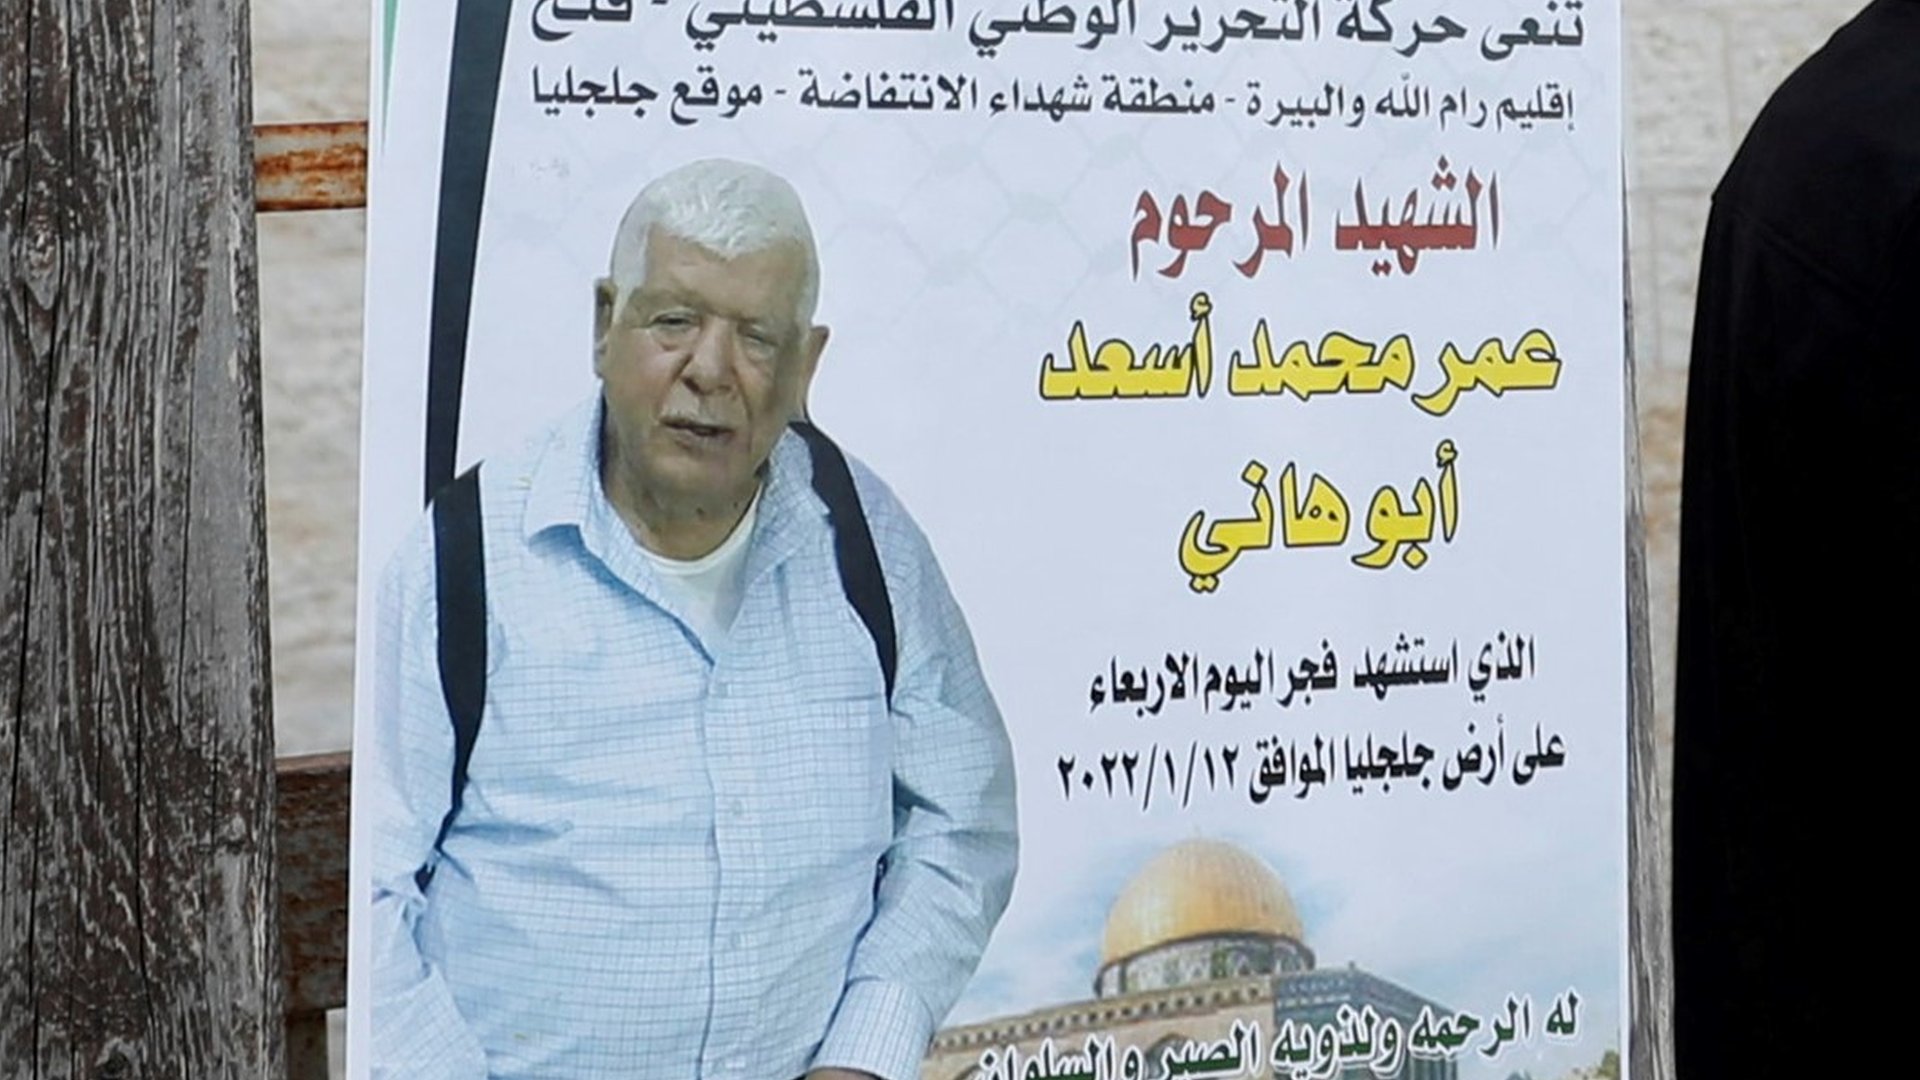 80-year-old Palestinian-American found dead after Israeli army raid in West Bank